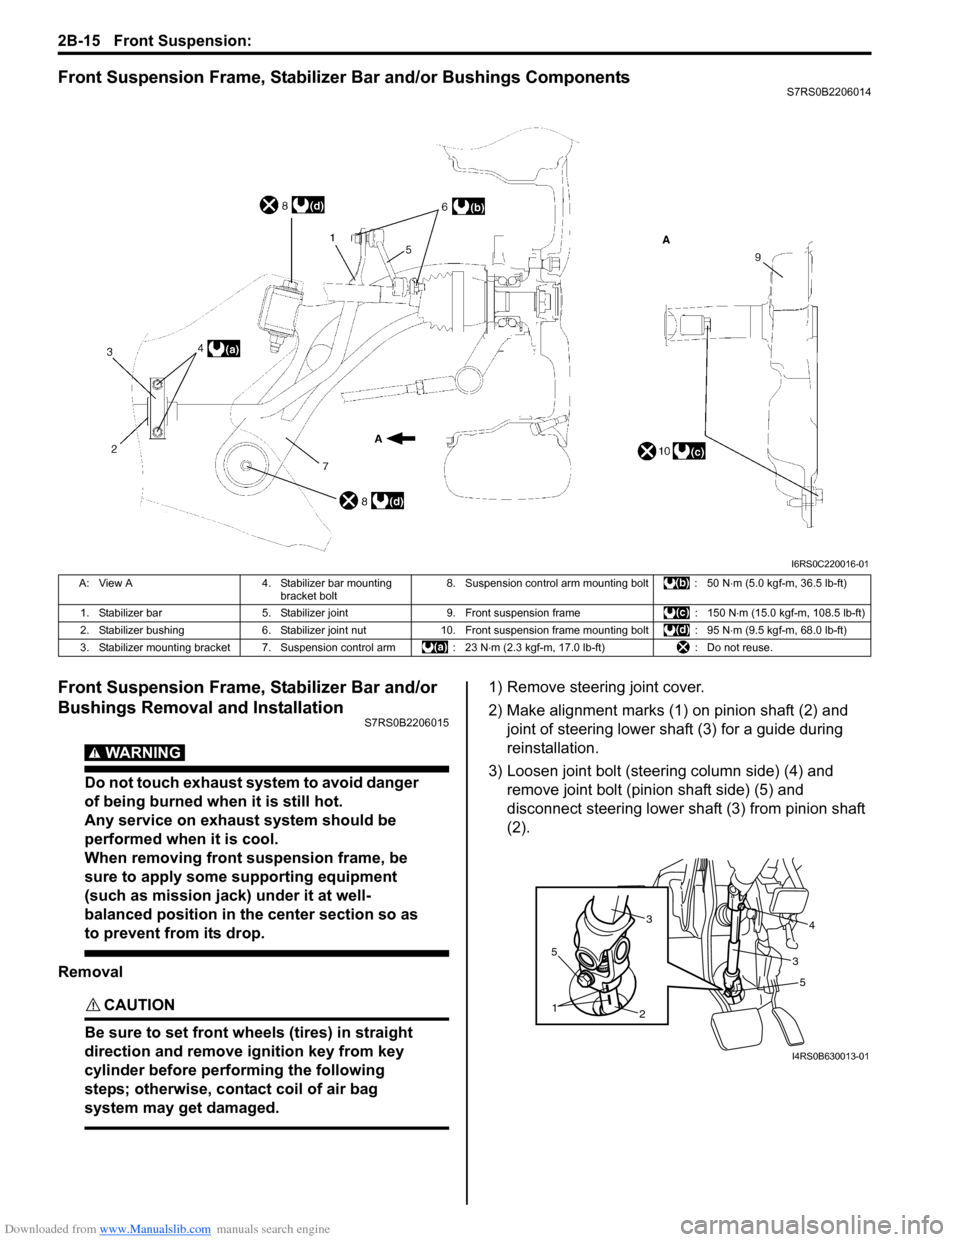 SUZUKI SWIFT 2007 2.G Service Workshop Manual Downloaded from www.Manualslib.com manuals search engine 2B-15 Front Suspension: 
Front Suspension Frame, Stabilizer Bar and/or Bushings ComponentsS7RS0B2206014
Front Suspension Frame, Stabilizer Bar 